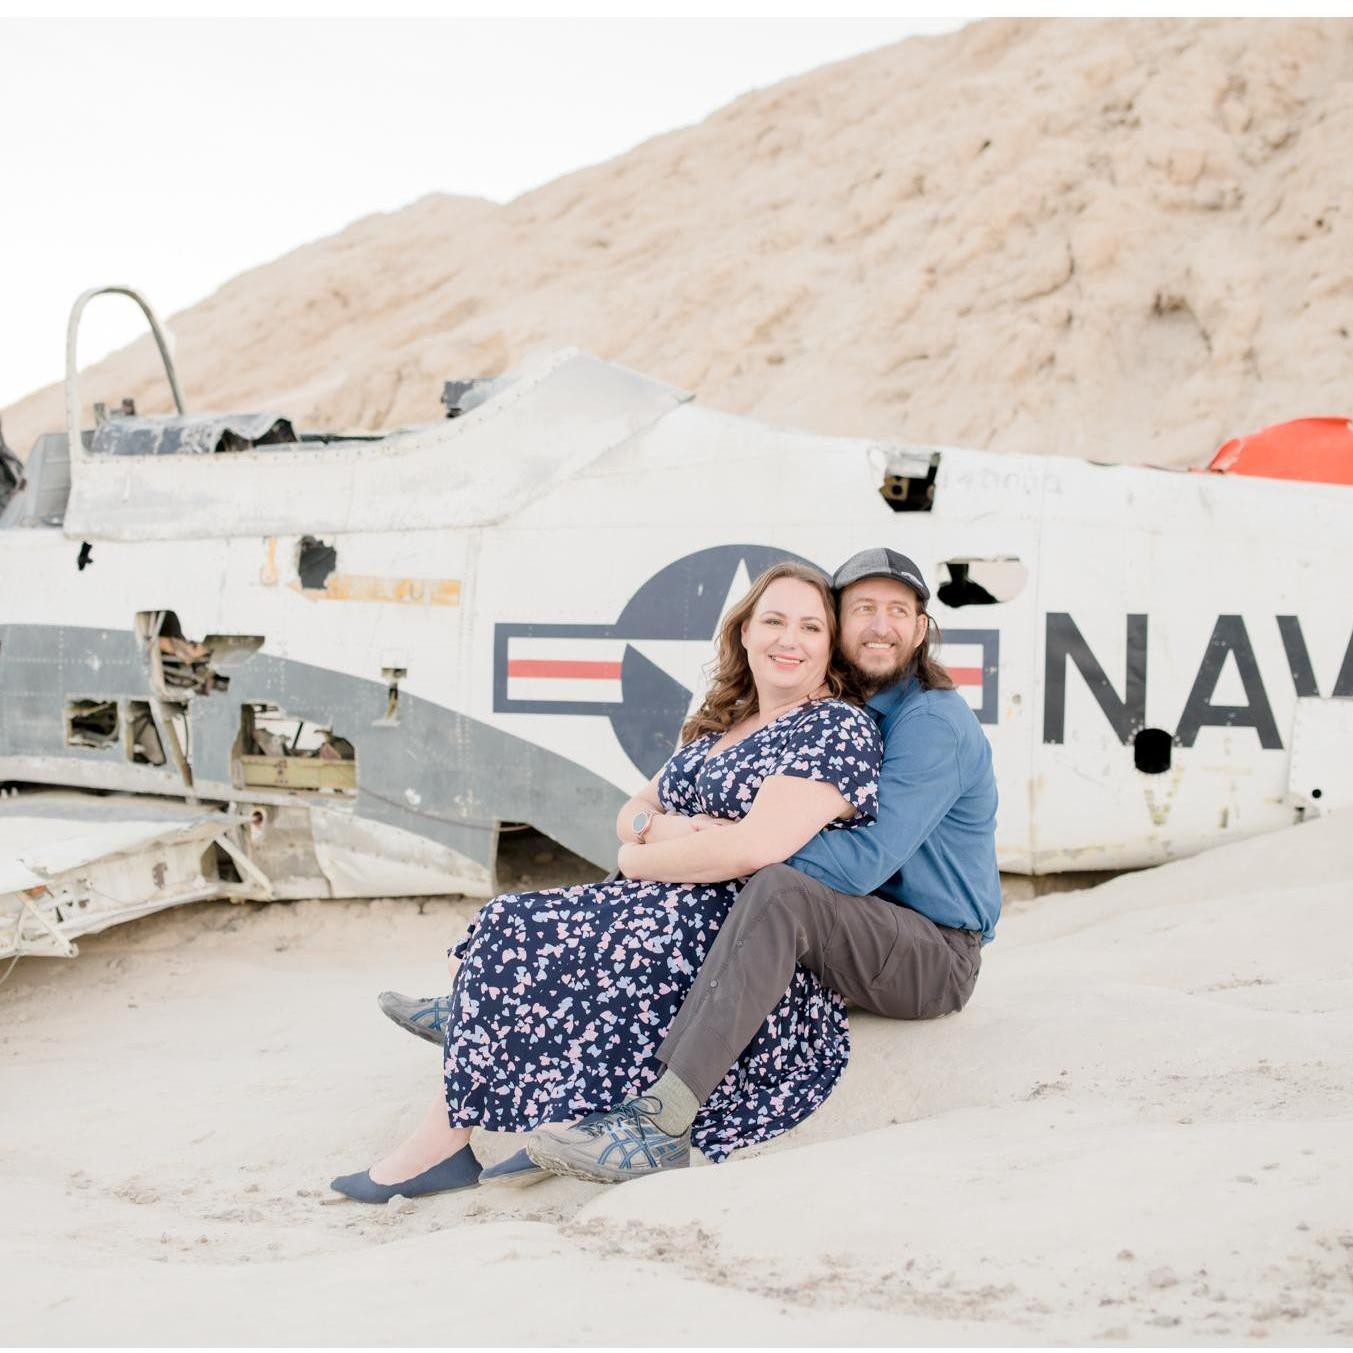 One of our engagement pictures.  This plane was so cool!